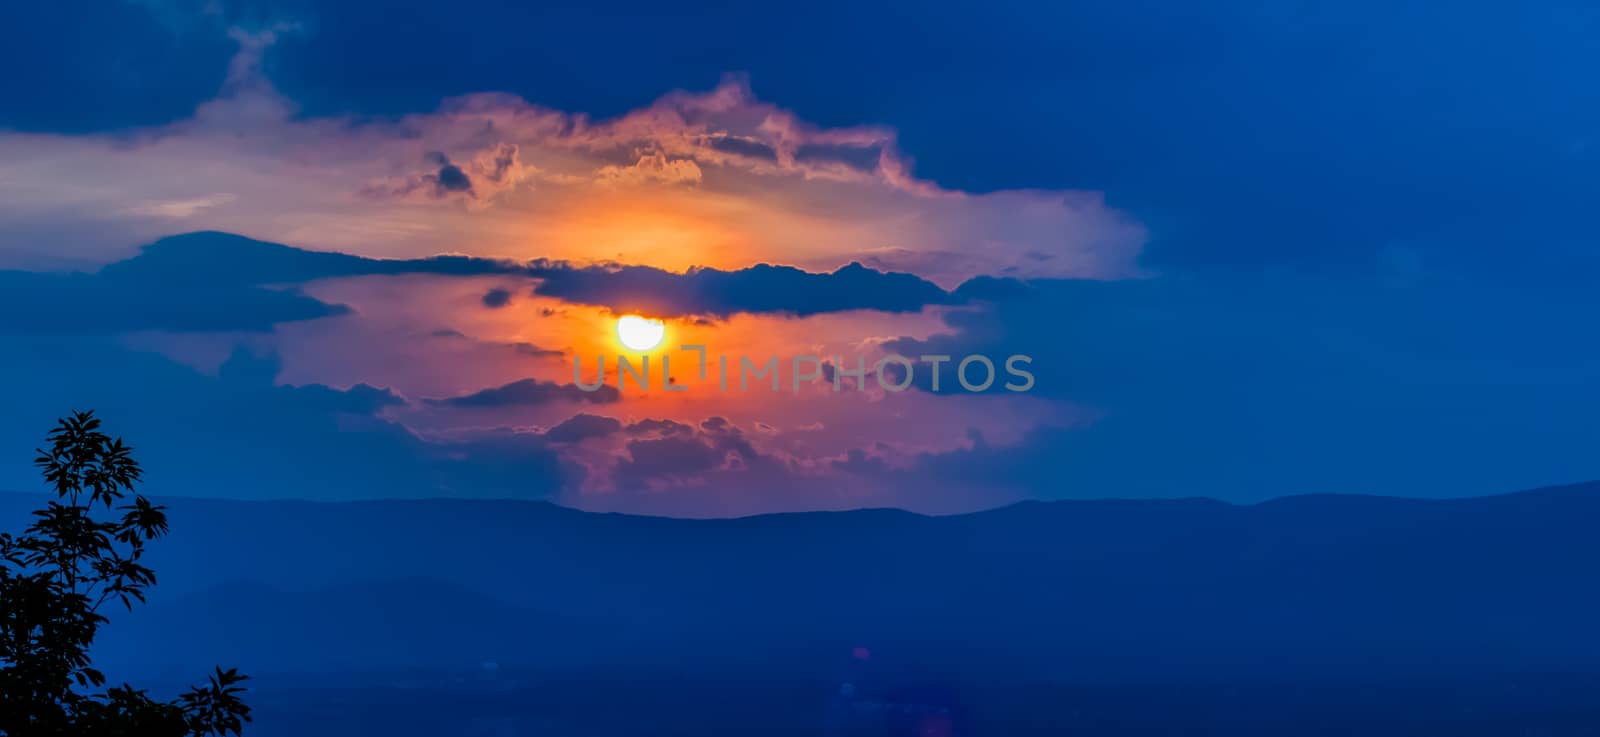 Nice sunset over mountains or north carolina by digidreamgrafix